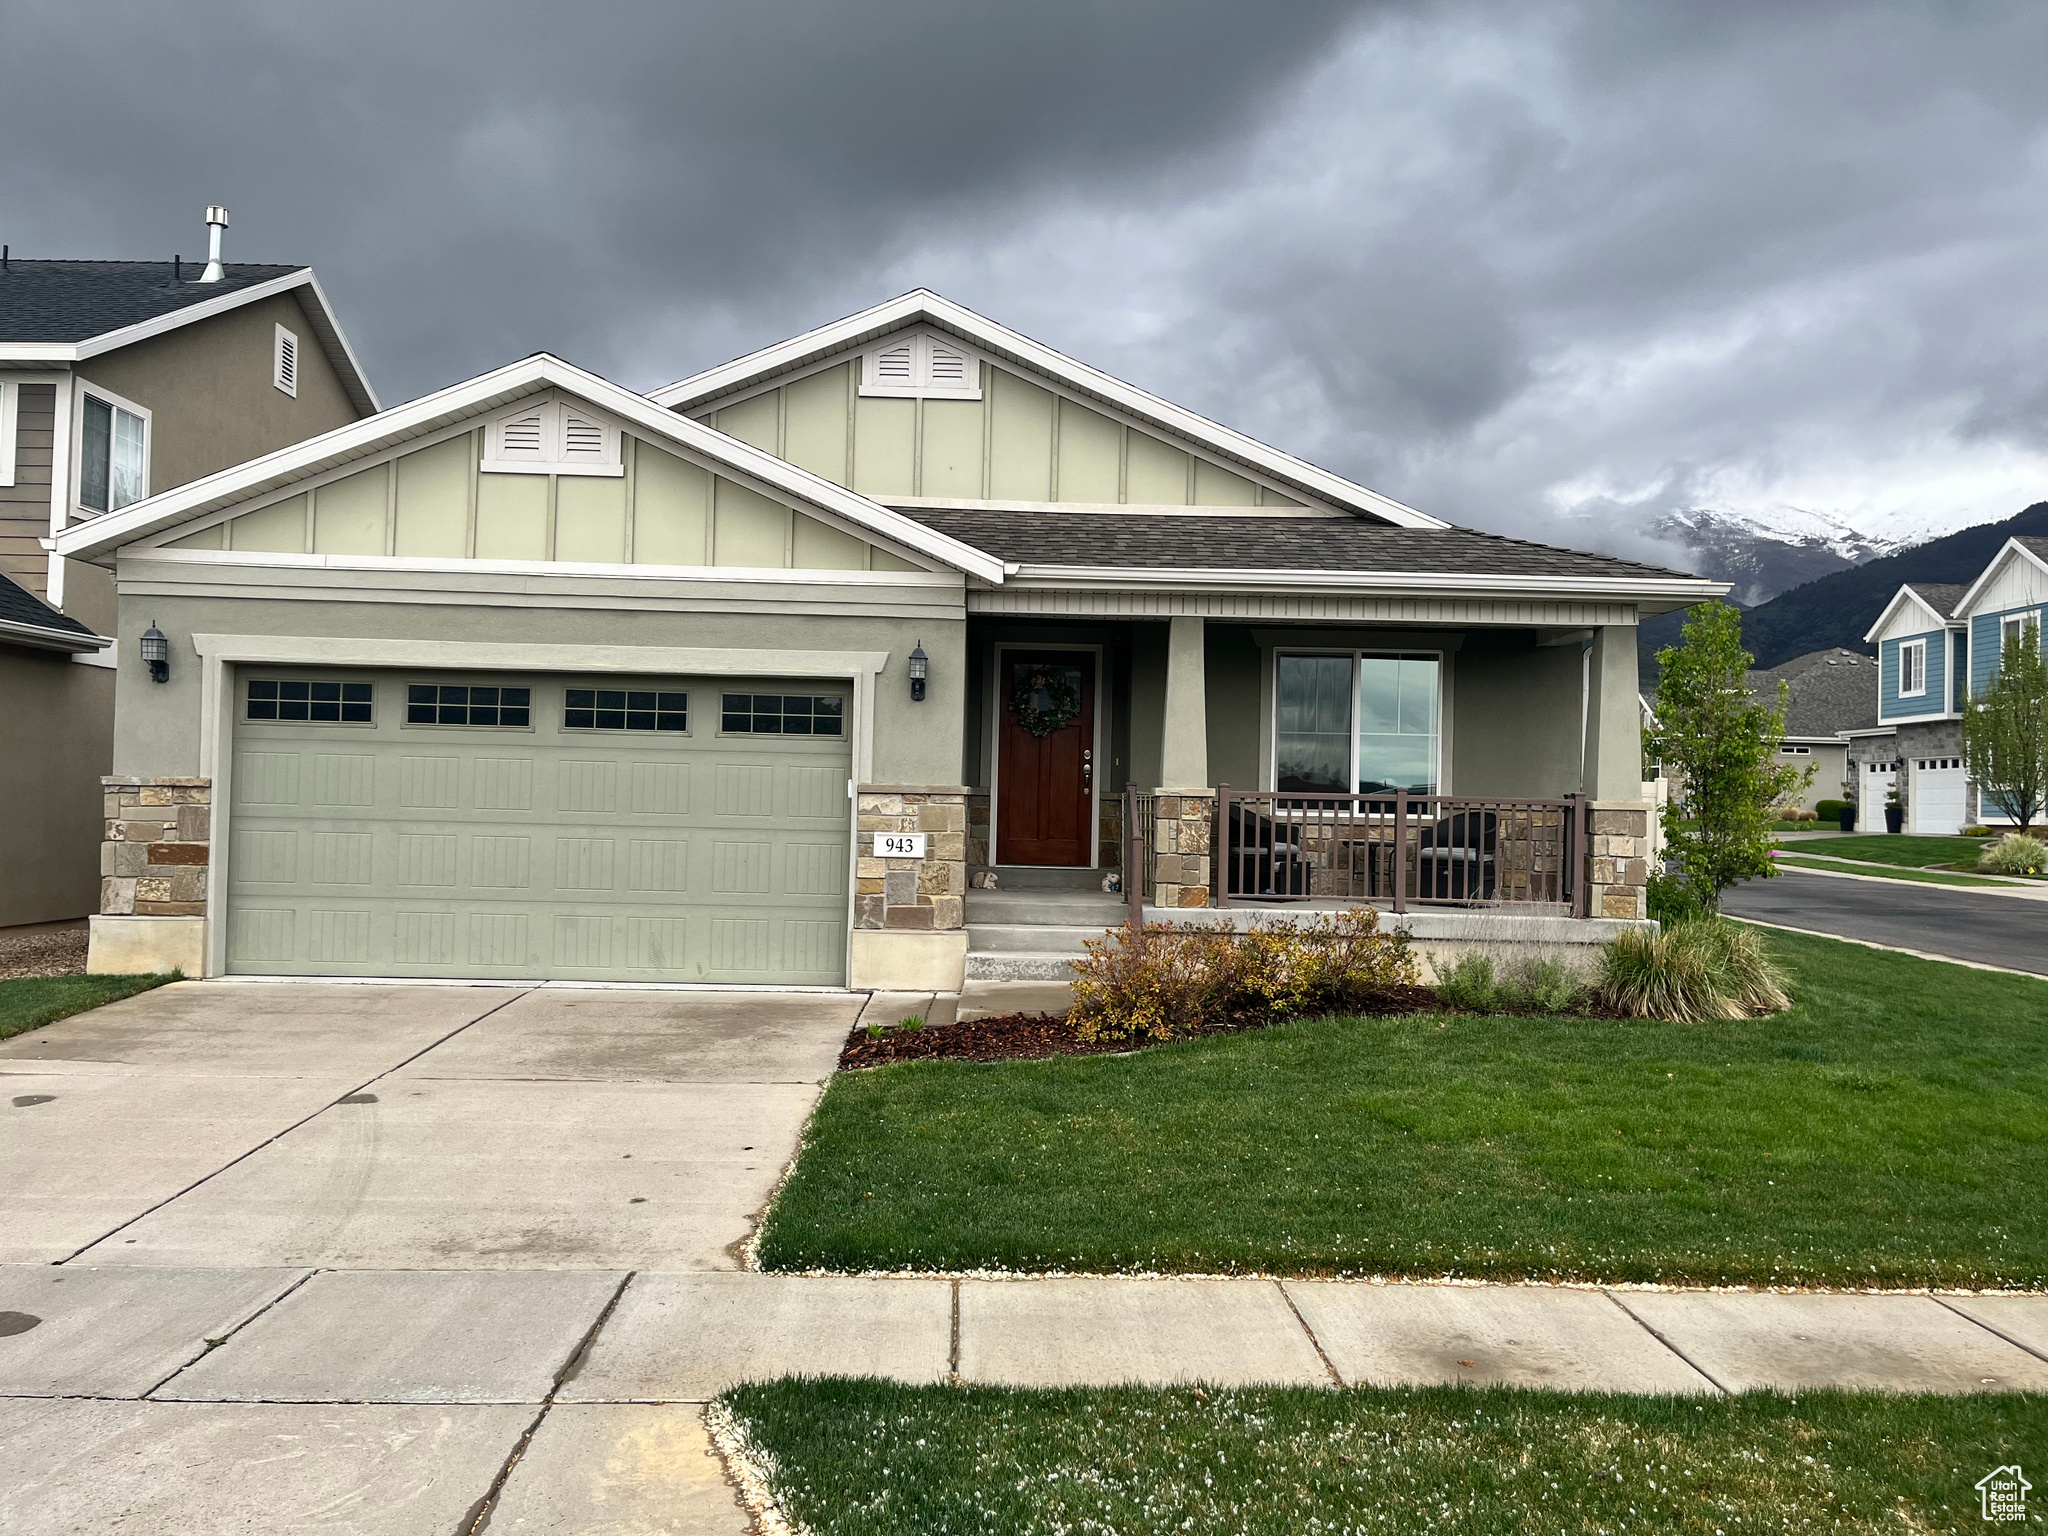 943 S DAISY, Fruit Heights, Utah 84037, 5 Bedrooms Bedrooms, 13 Rooms Rooms,2 BathroomsBathrooms,Residential,For sale,DAISY,1995934